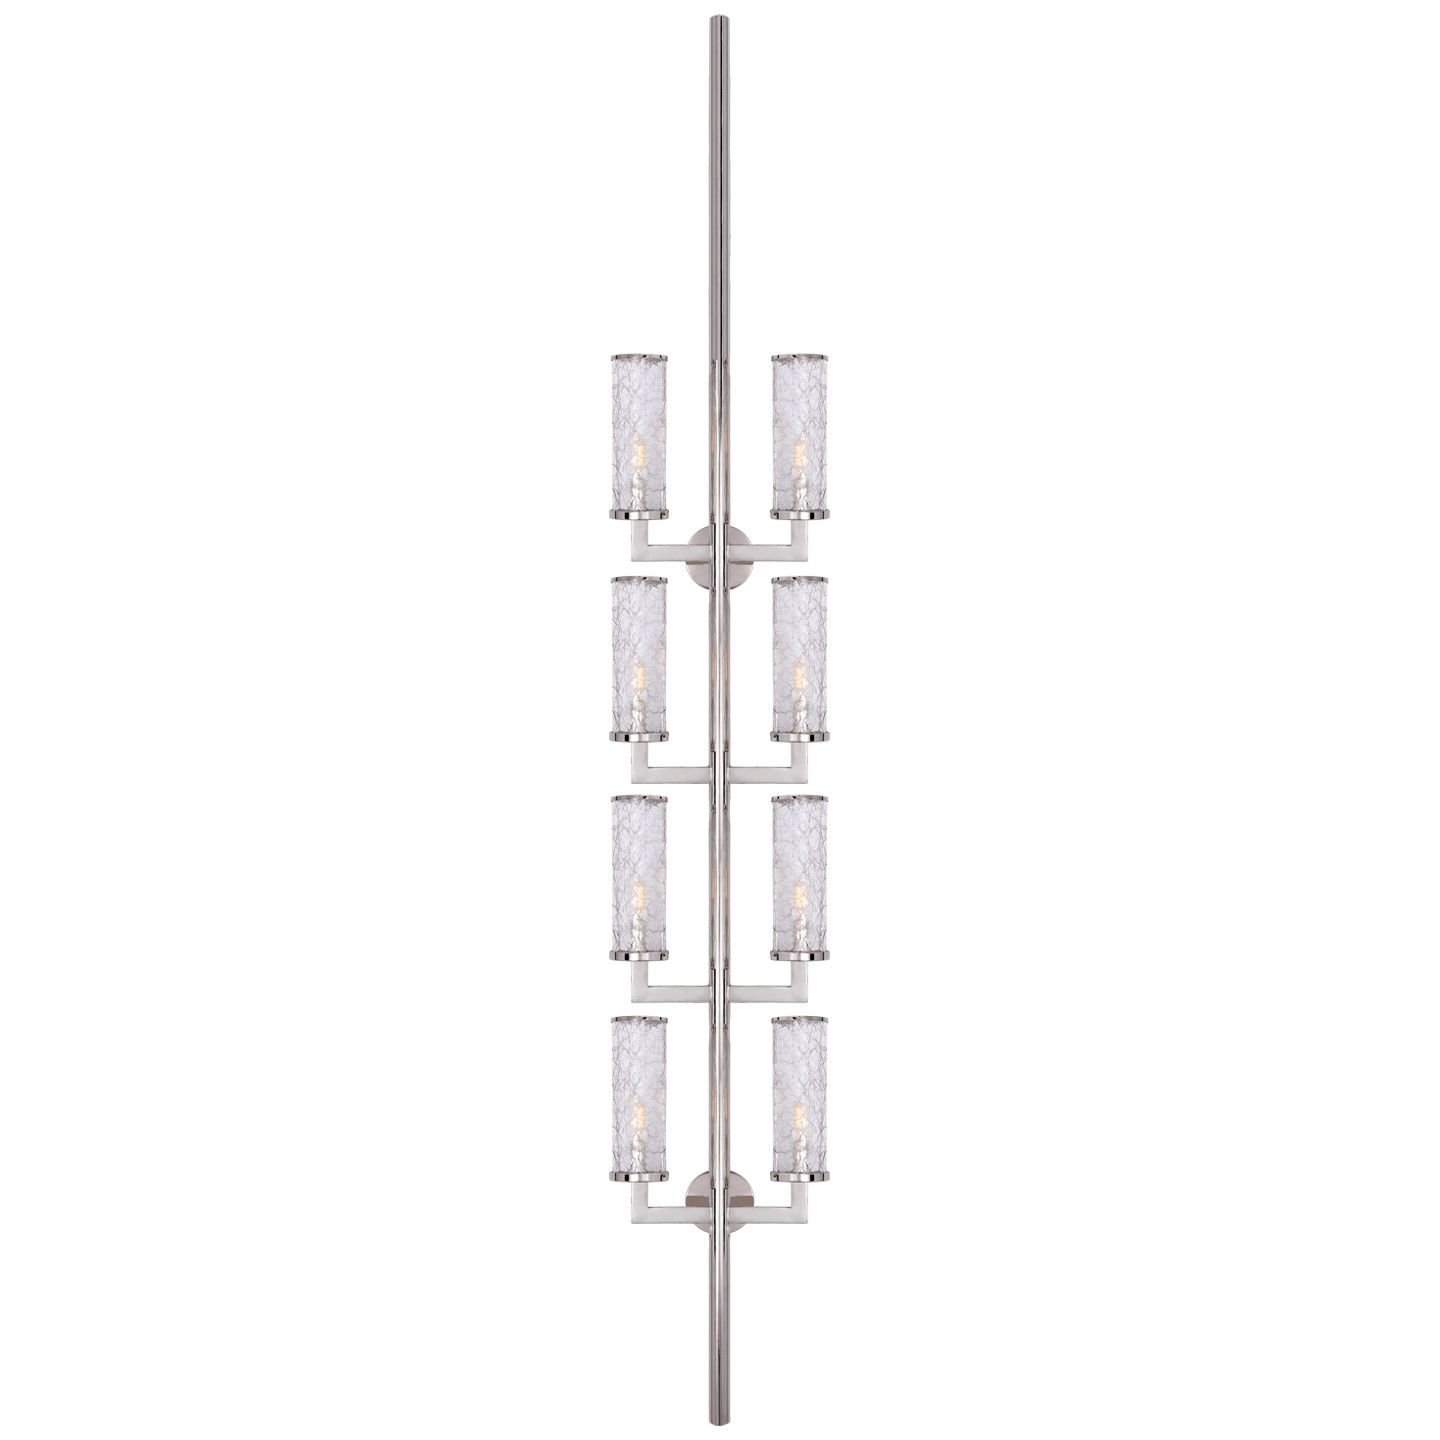 Liaison Statement Sconce Polished Nickel